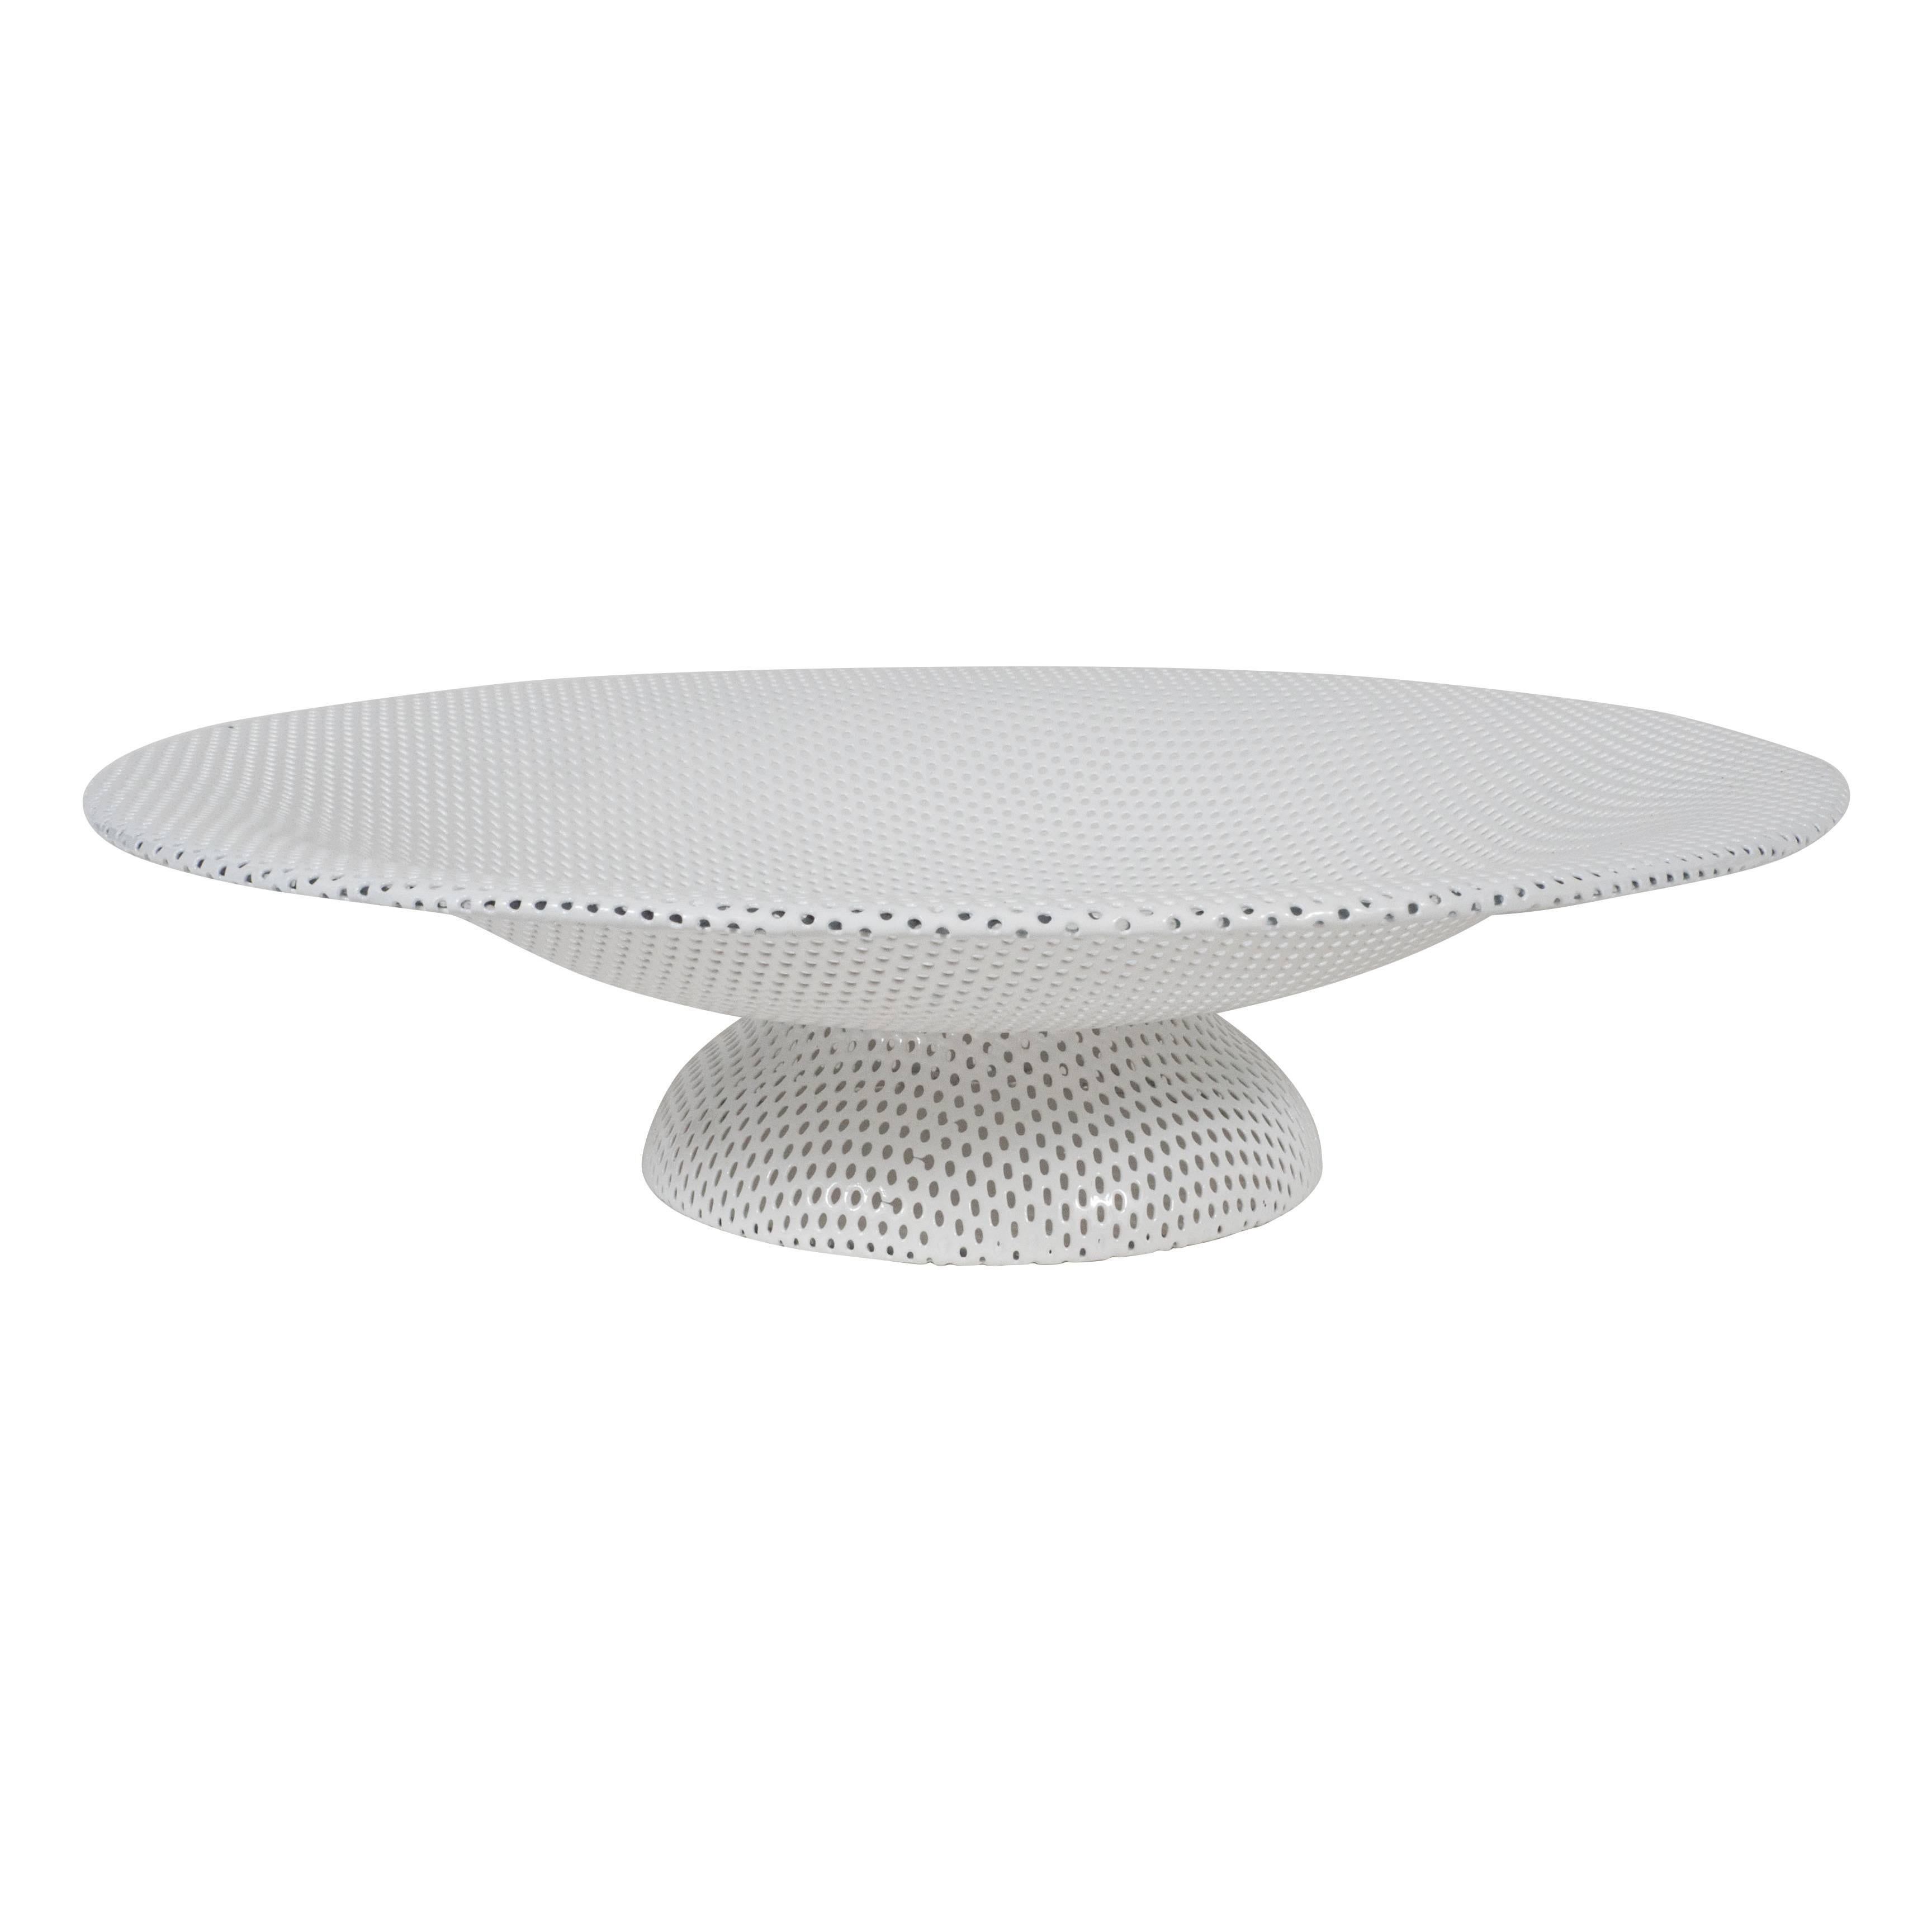 White Pierced Metal Pedestal Bowl in the Style of Mategot For Sale